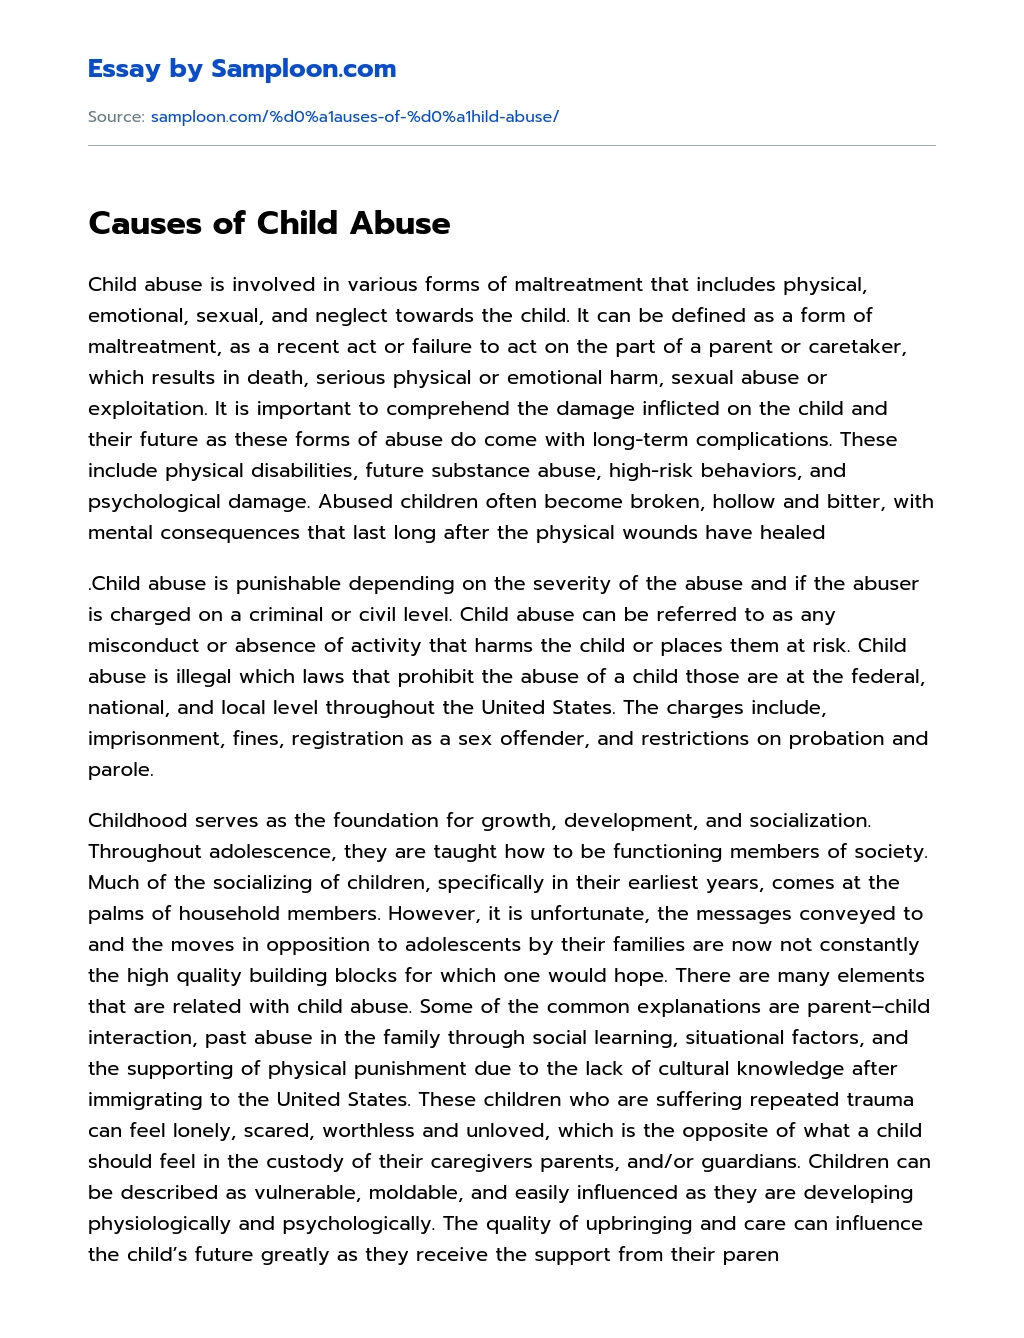 Causes of Child Abuse essay